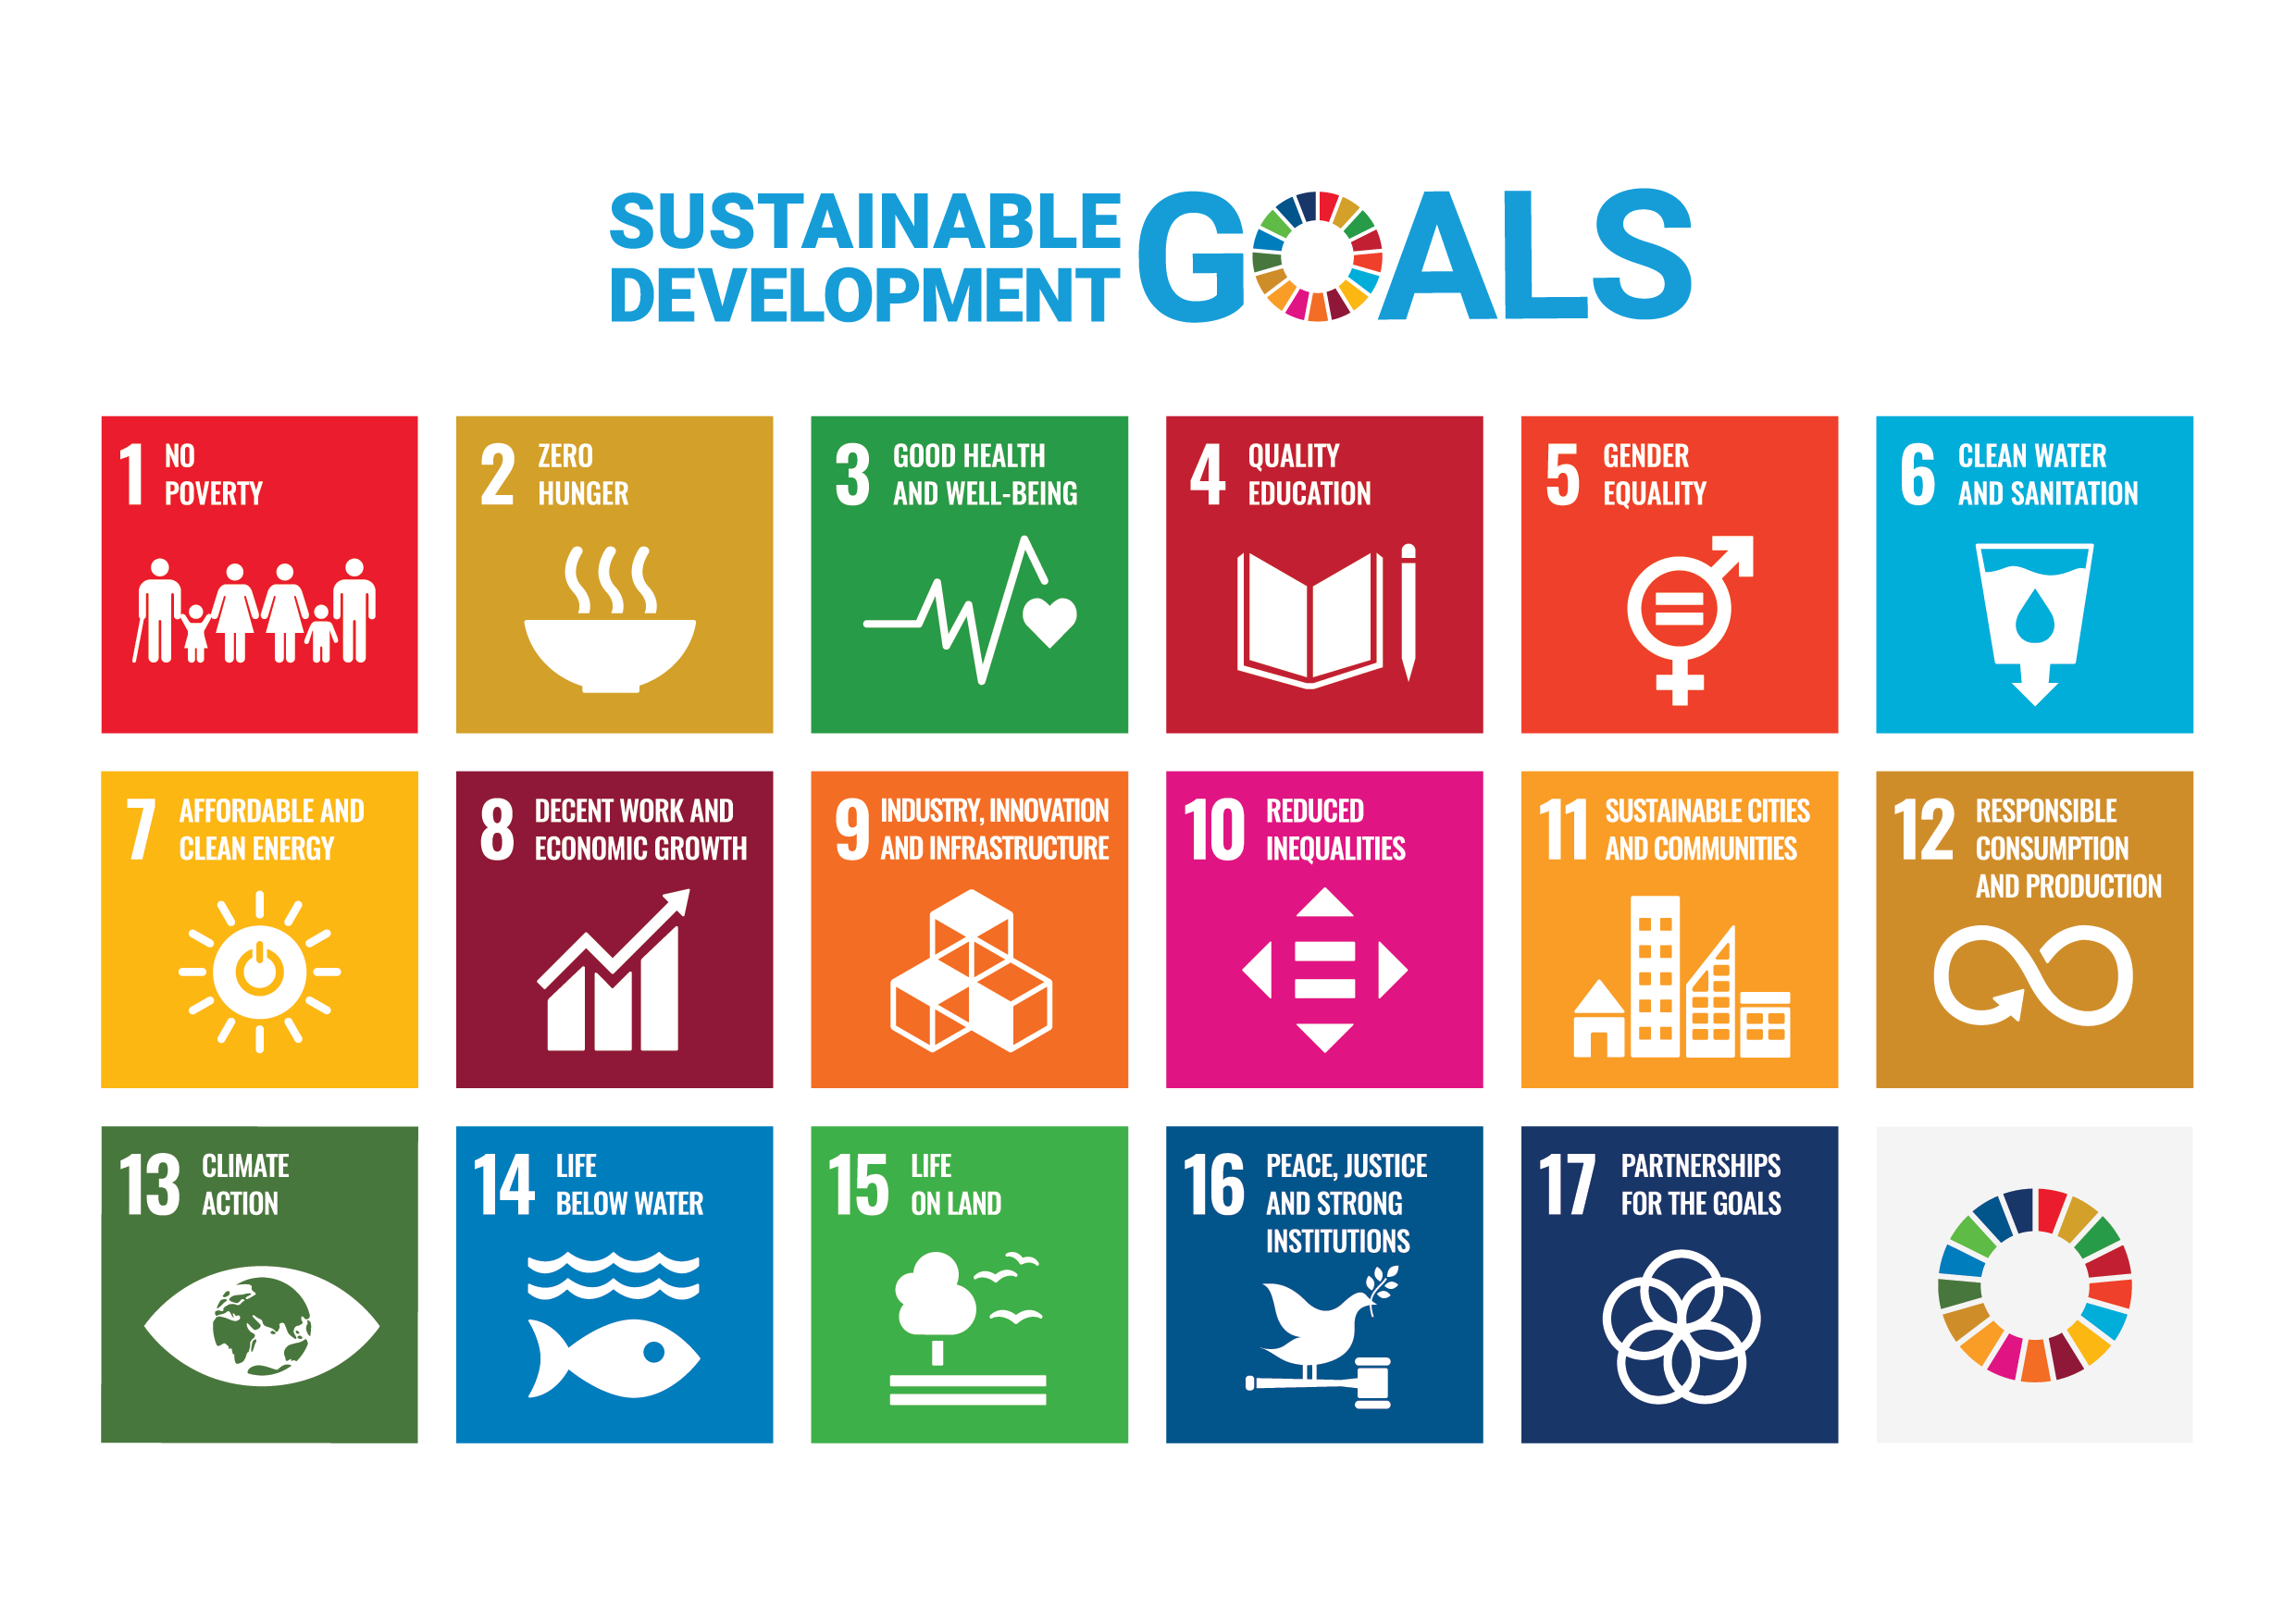 How Do Cork Insoles Support The SDGs?